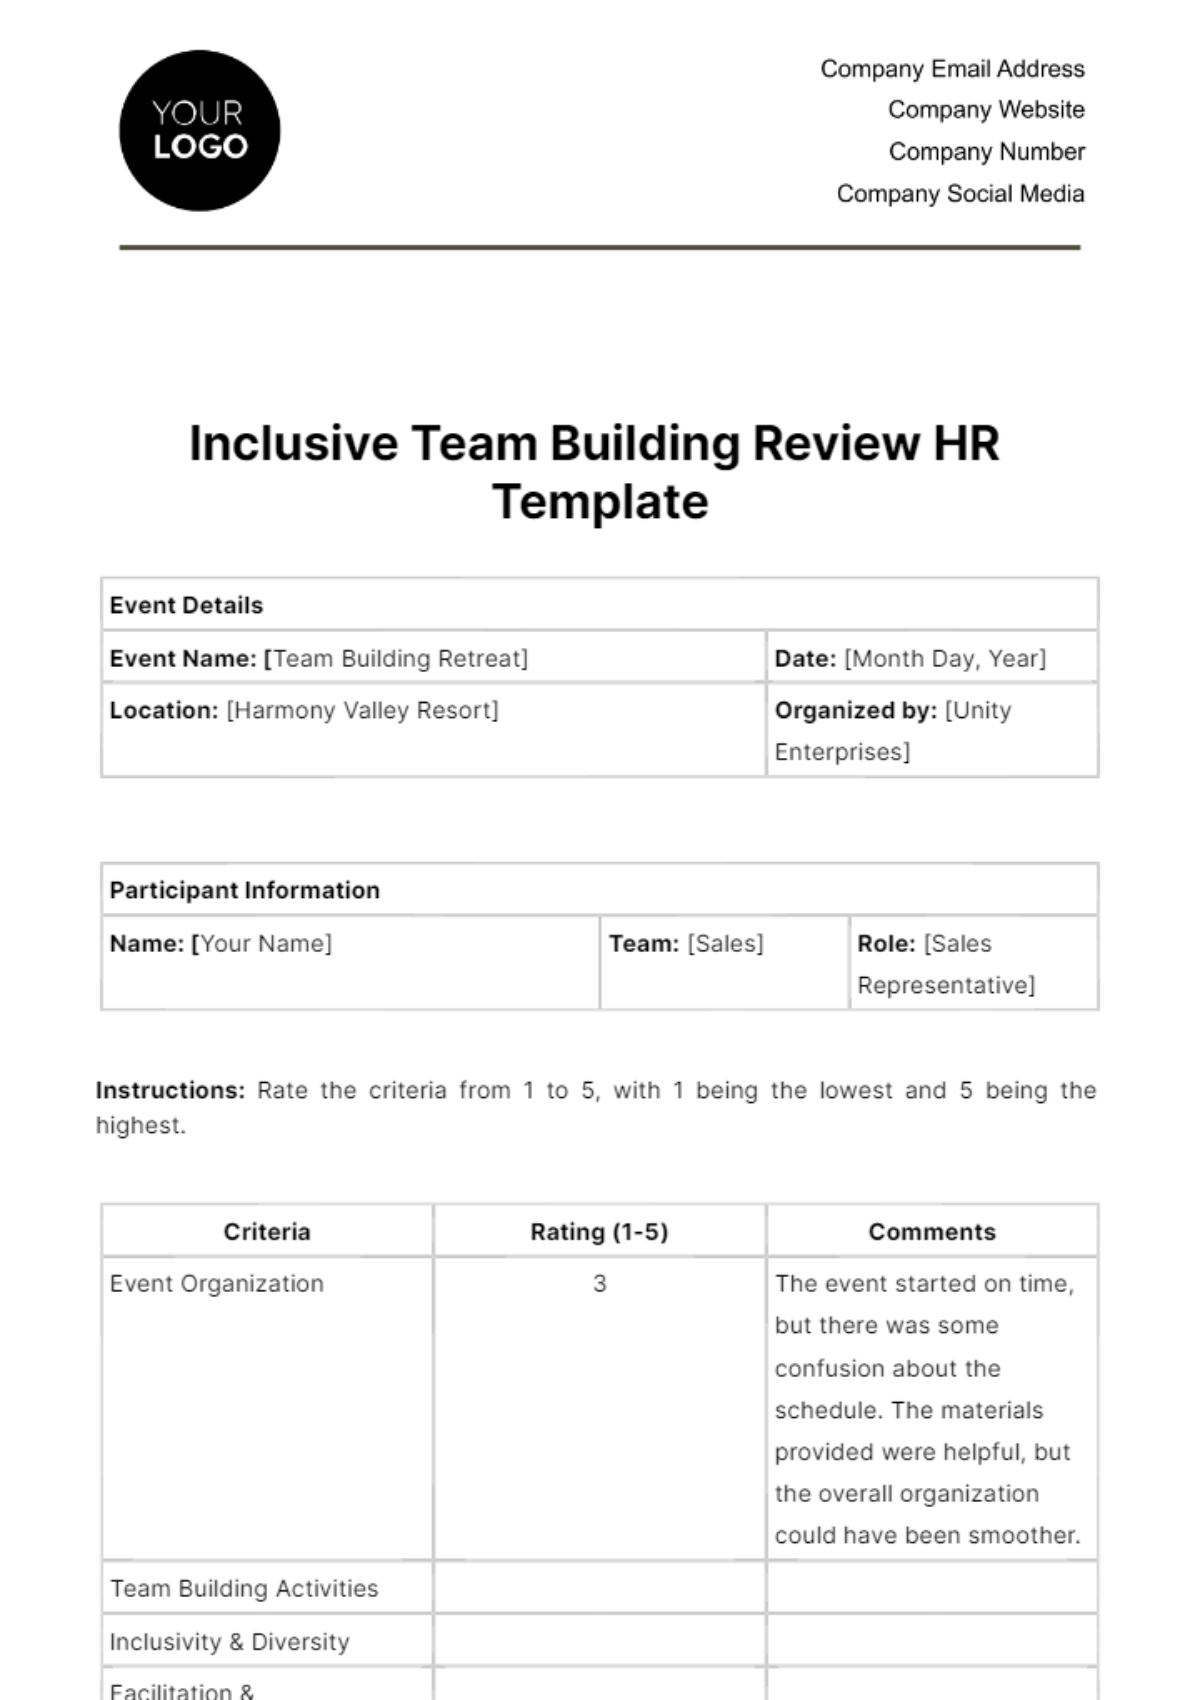 Inclusive Team Building Review HR Template